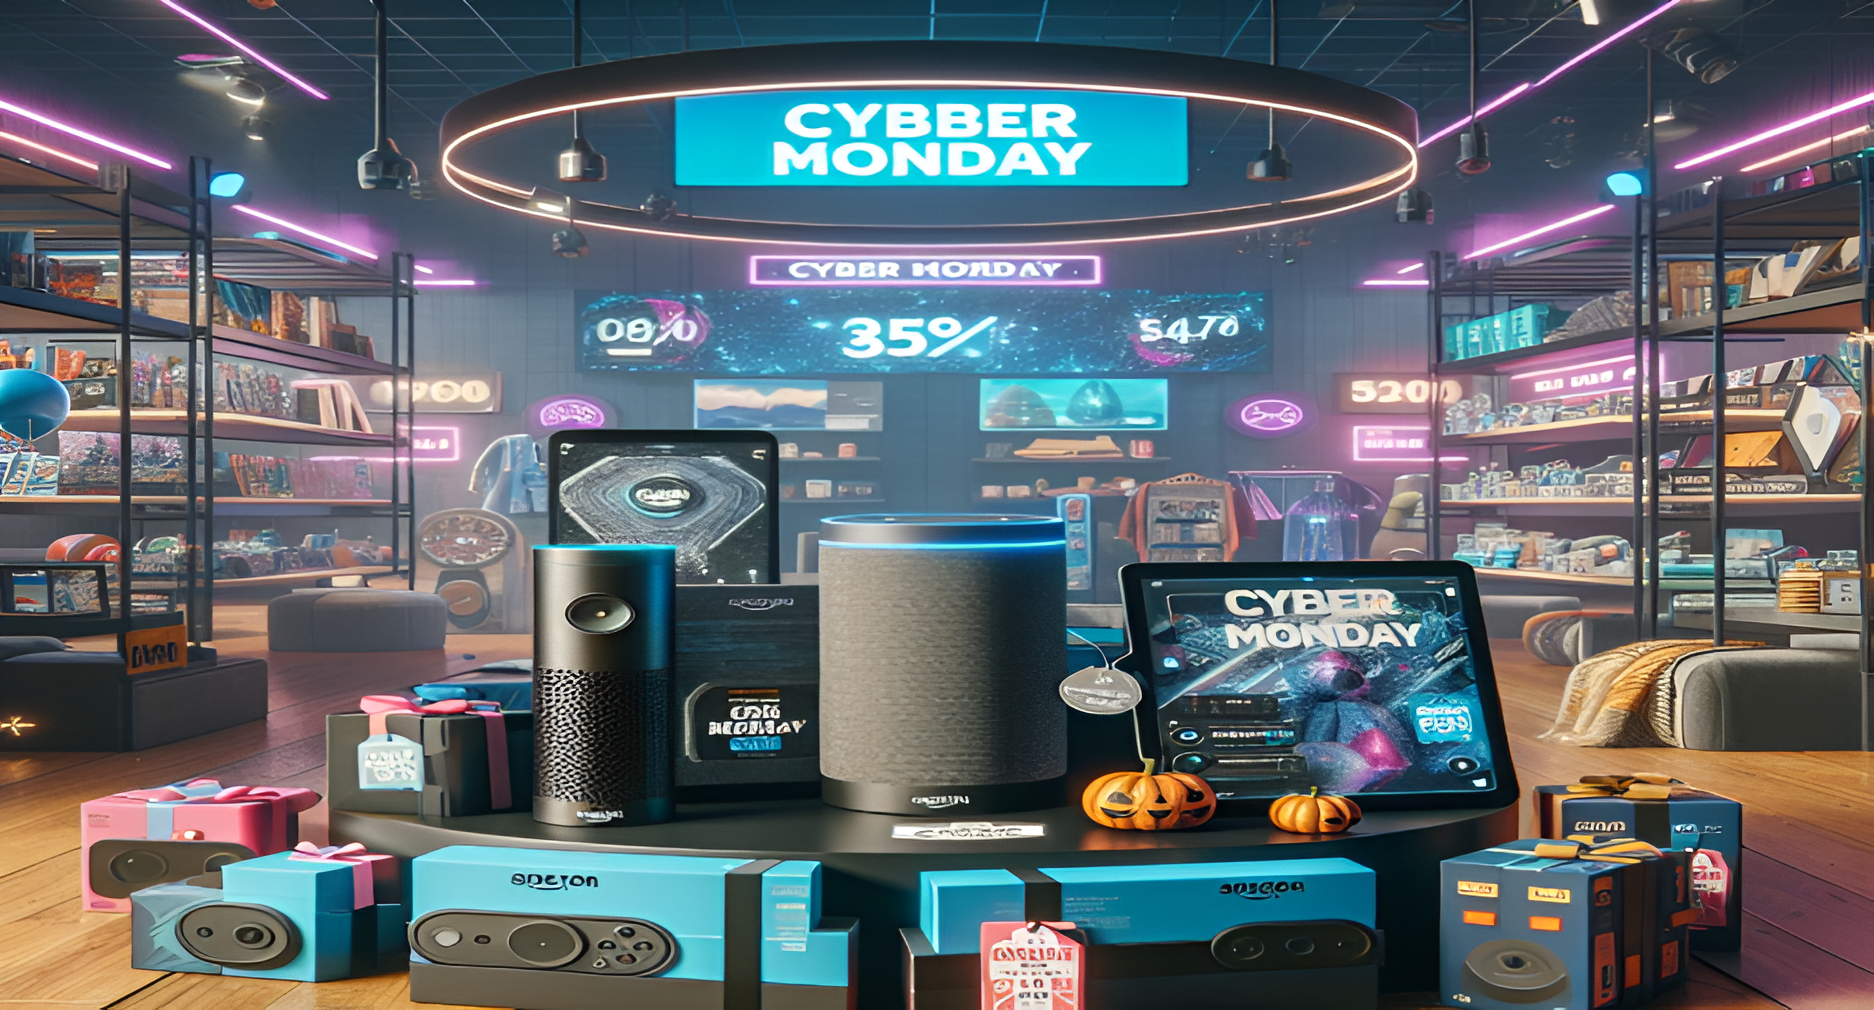 Discover the best Cyber Monday deals on Amazon! Save big on electronics, furniture, toys, and more. Don't miss out!